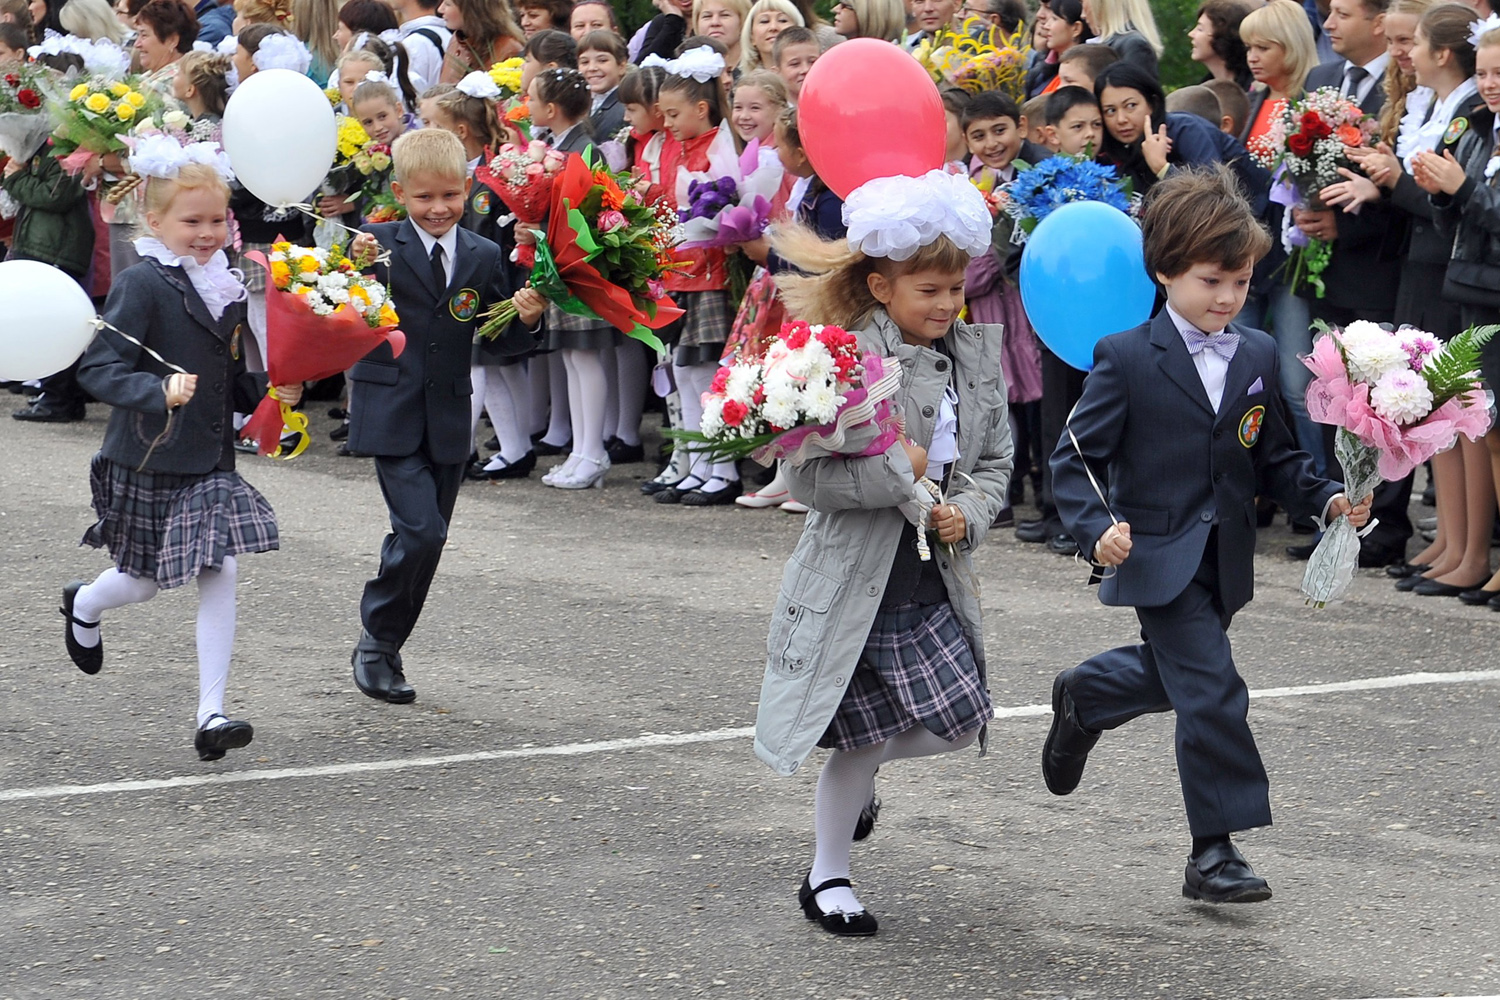 First grade students at a school line up during the start of a new school year on Knowledge Day in Ryazan, Russia on Sept. 1, 2014.